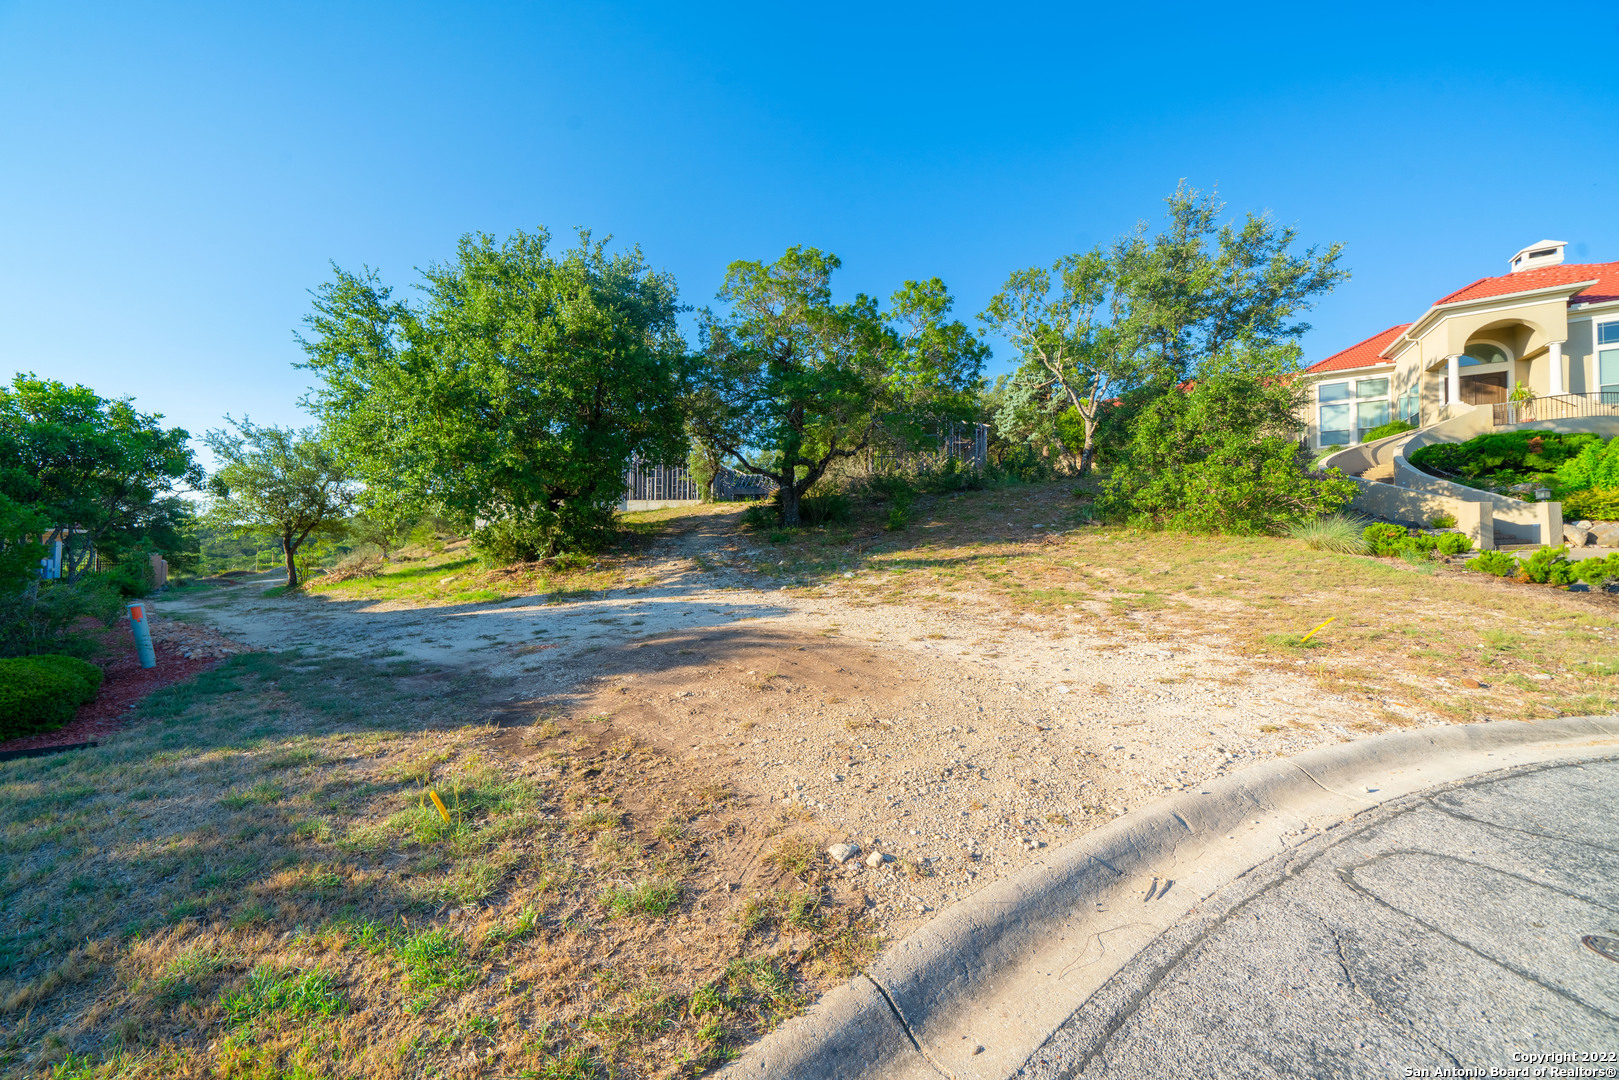 Build your dream home in this one of a kind lot on a cul-de-sac in the heart of The Dominion neighborhood. This lot is over 1 acre and features a gorgeous and tranquil view of the Hill Country. There is an existing slab and frame.  Design the home of your dreams in the perfect location with easy access to the highway and just minutes away from La Cantera and The Rim. Make this your lot today!